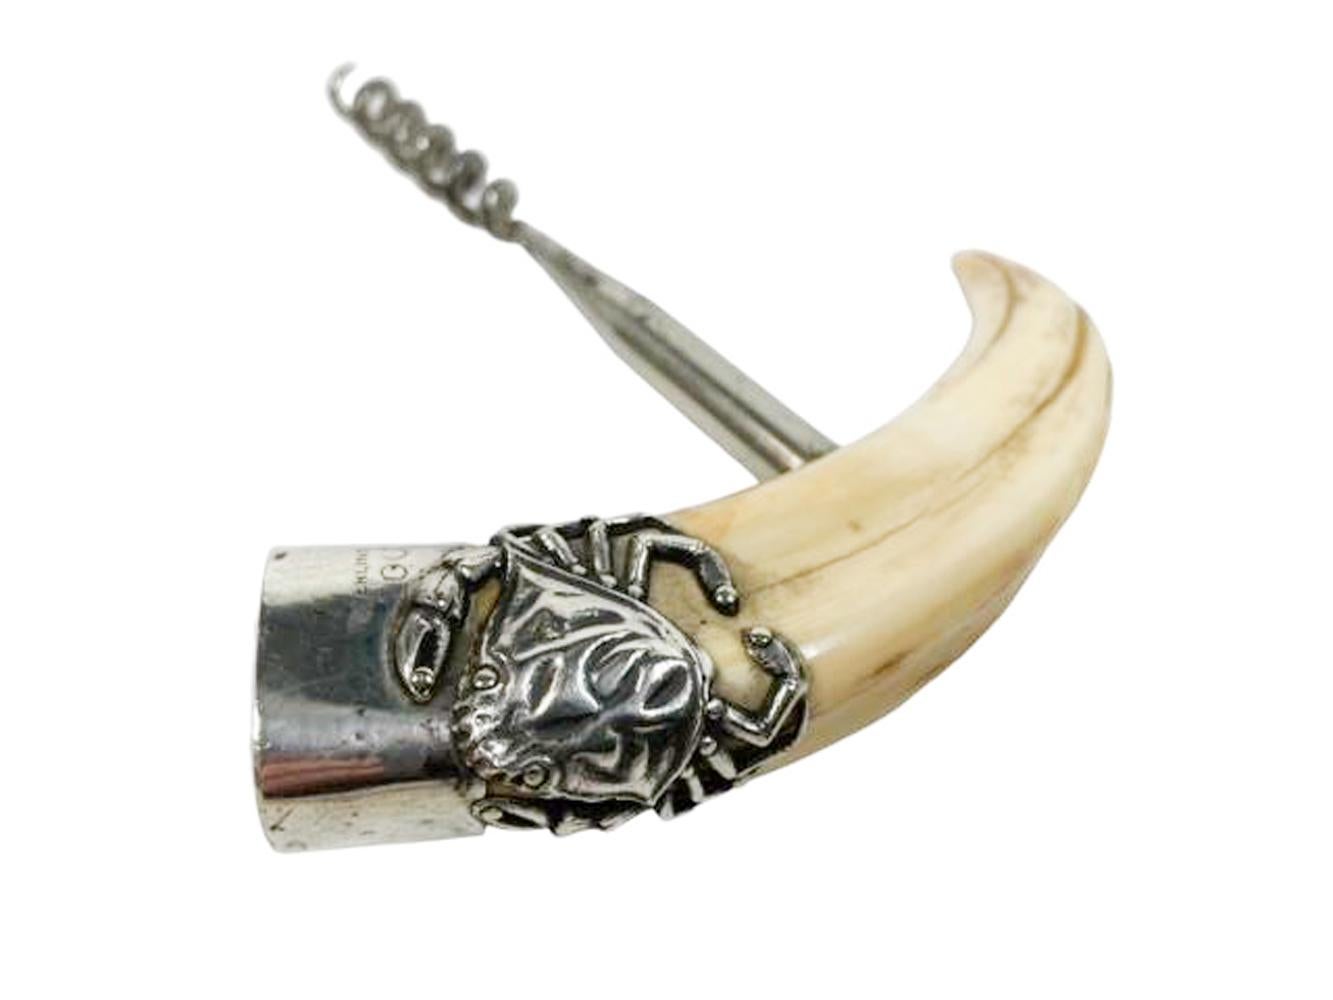 Edwardian Boar's tusk handled corkscrew with a sterling silver crab mounted on the monogrammed sterling end cap. Marked 'Sterling